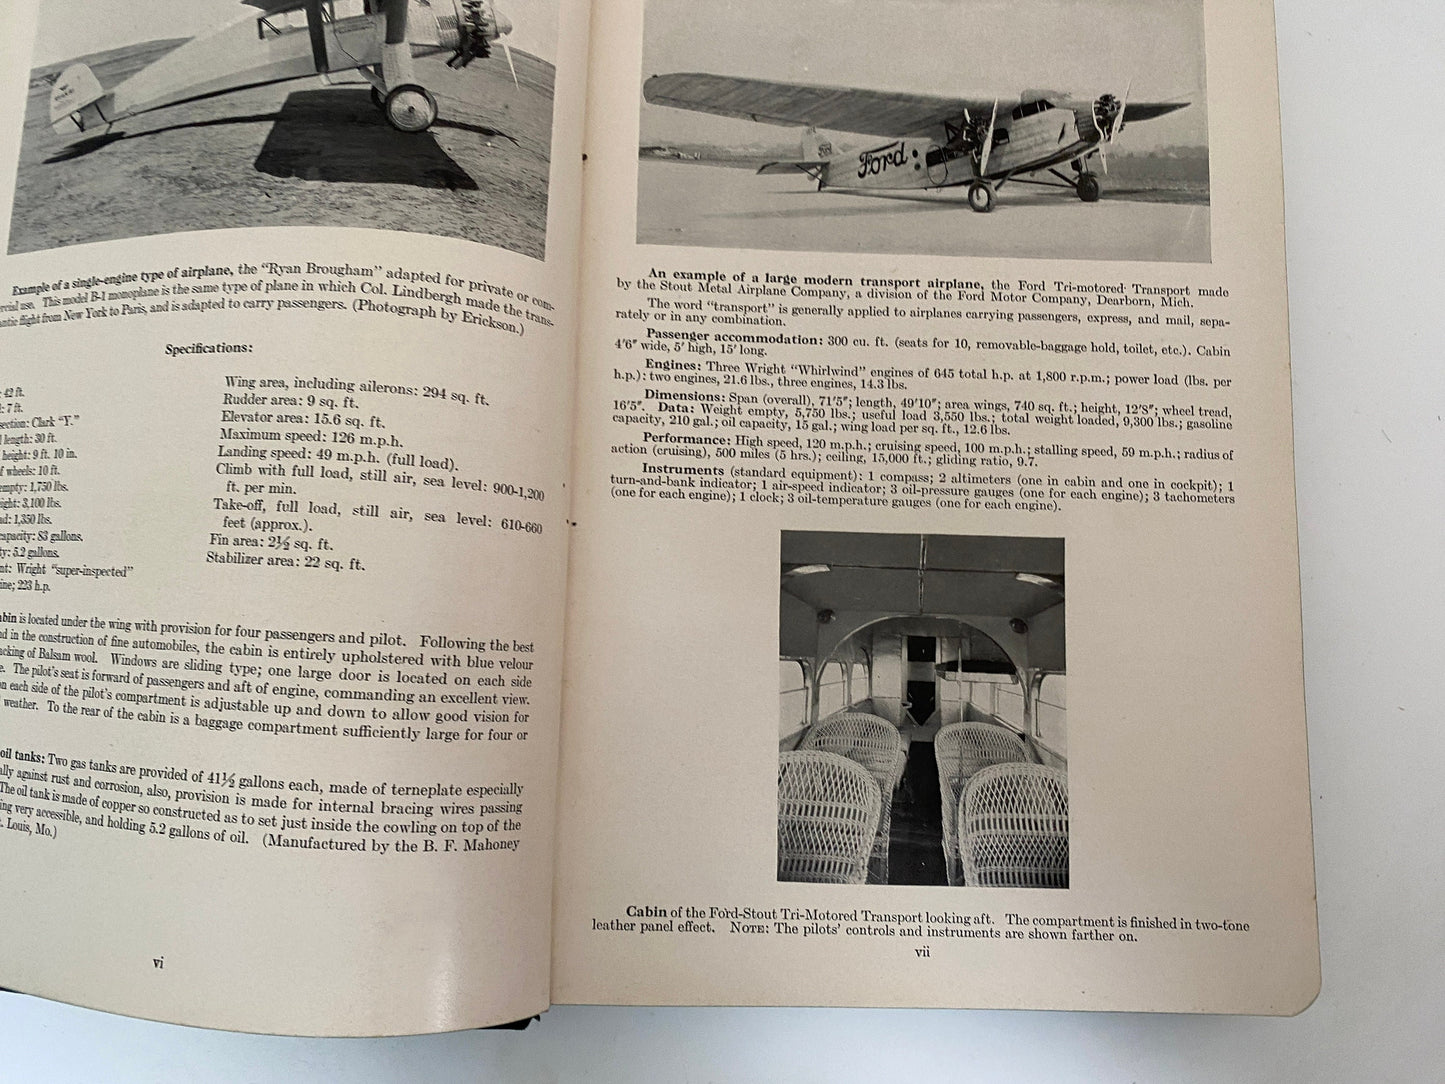 1929 Vintage Book, Dyke's Aircraft Engine Instructor